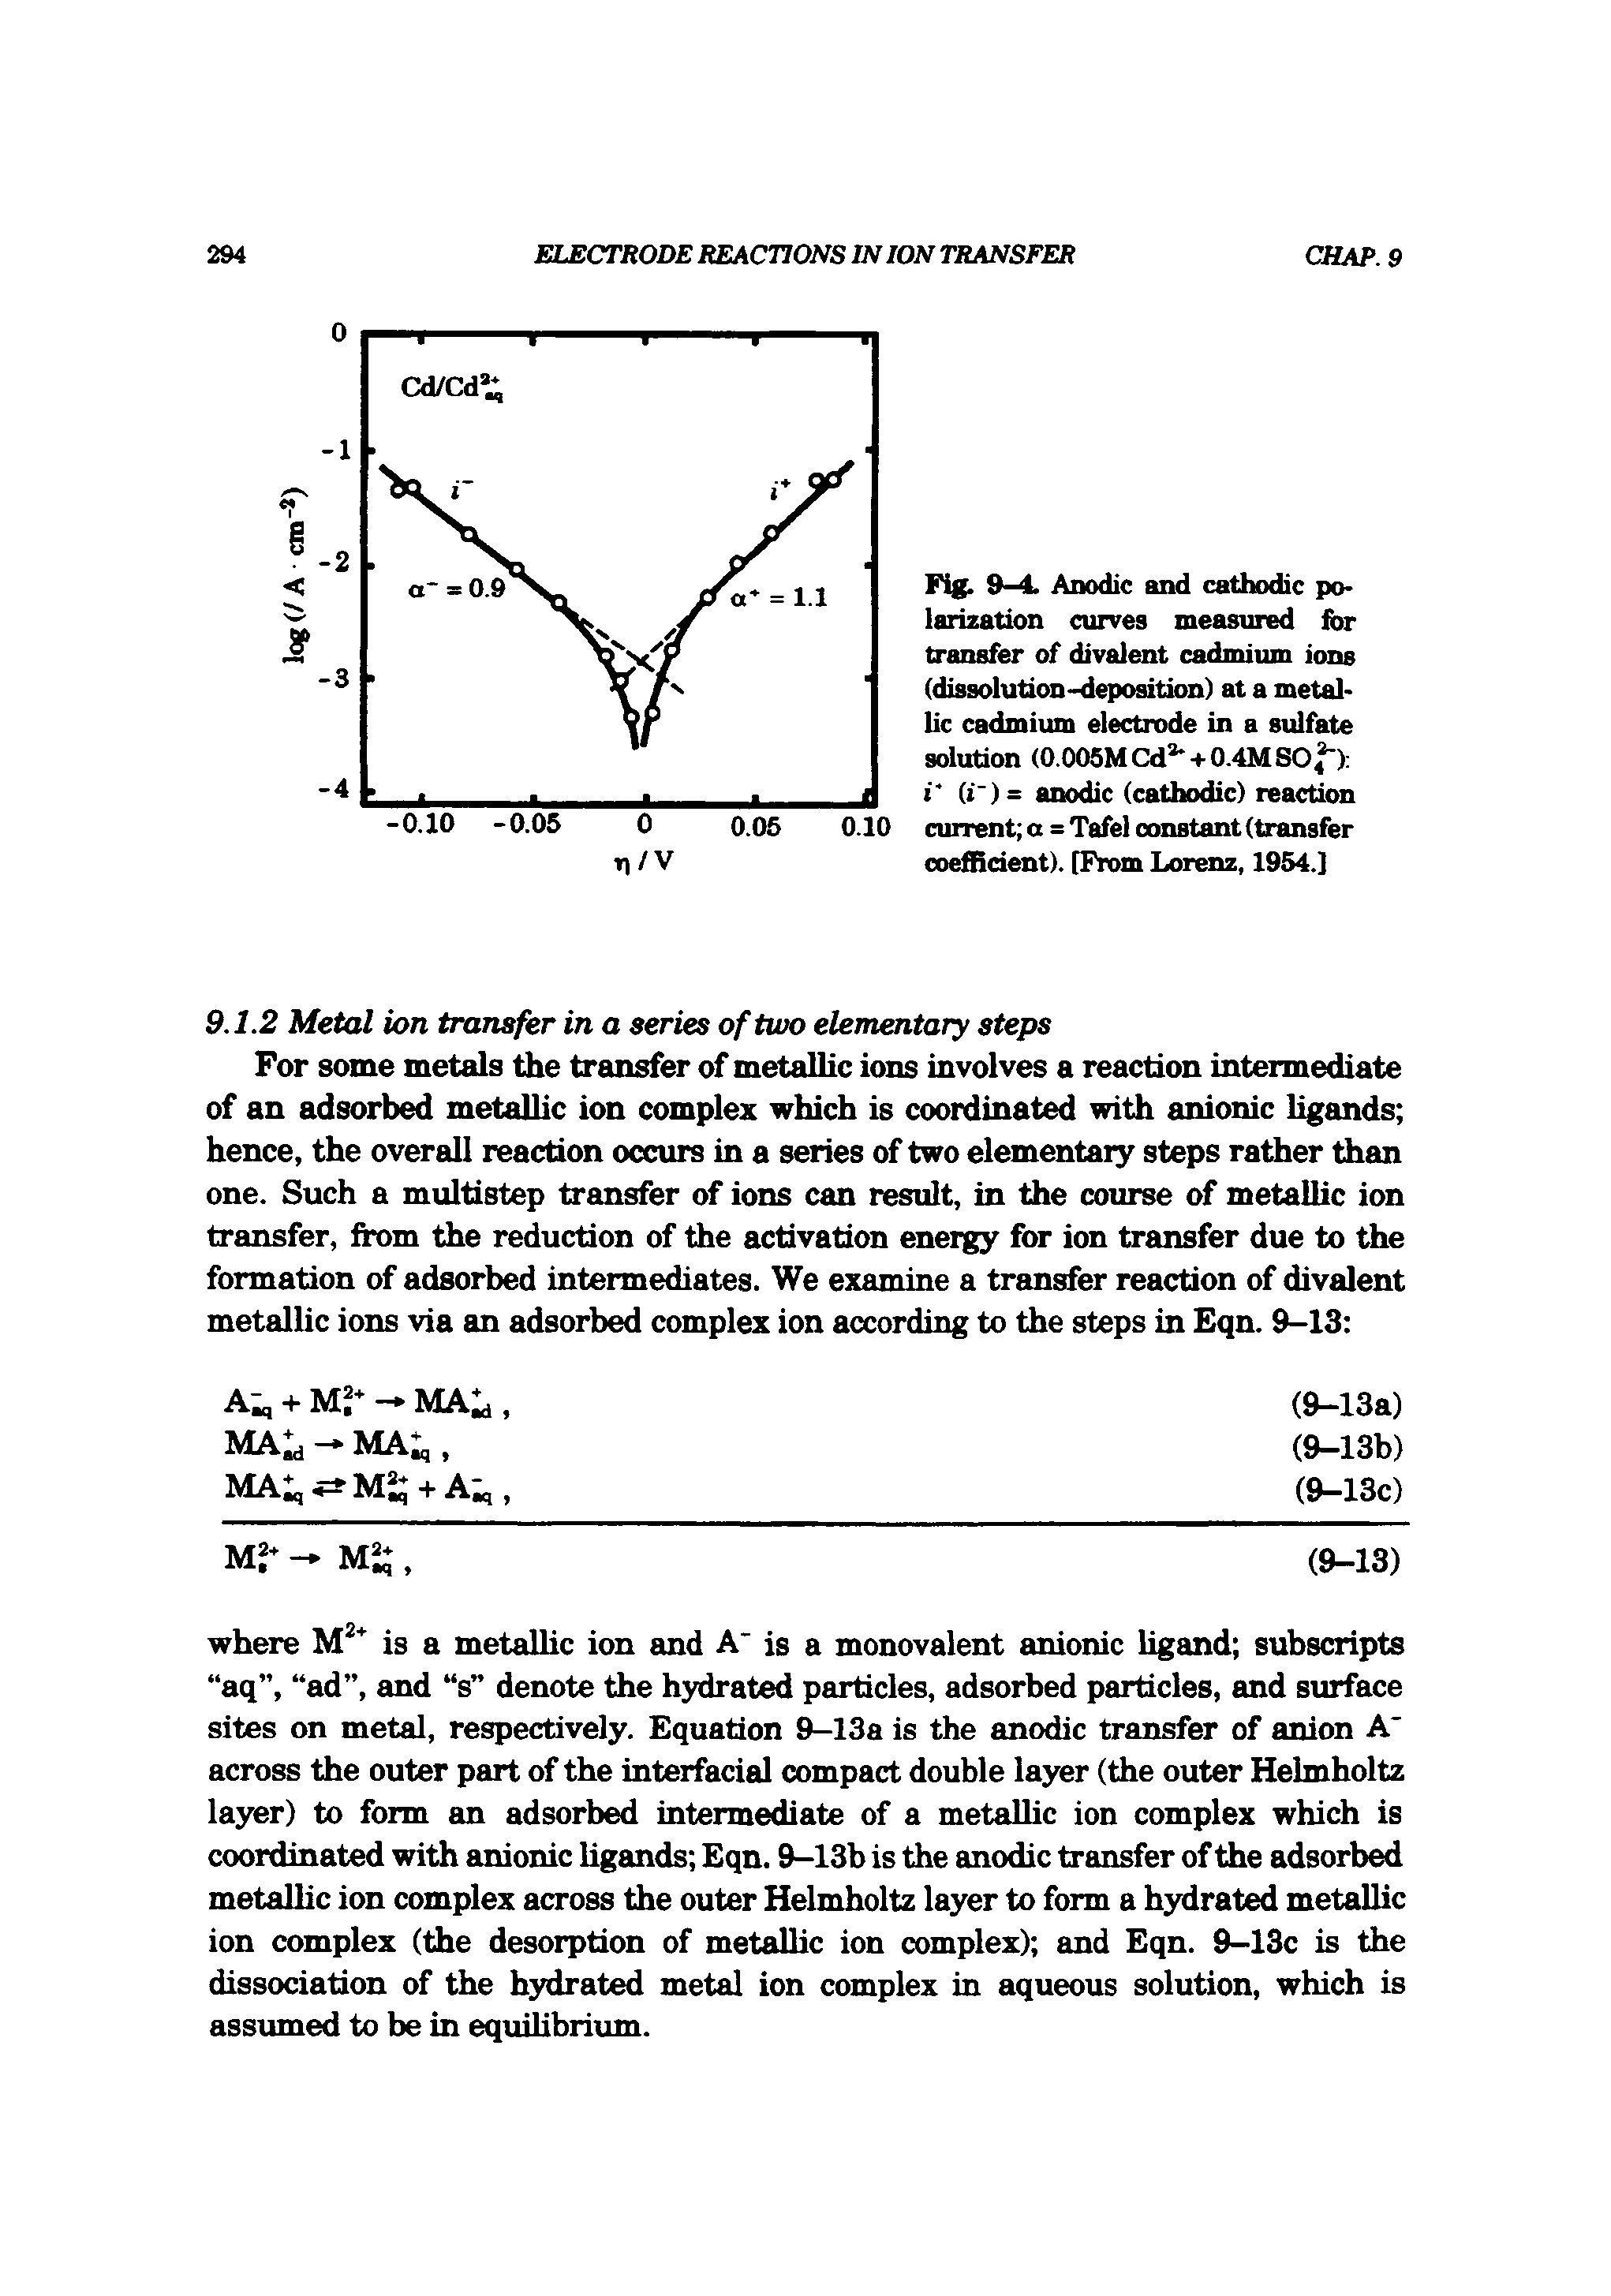 Fig. 9-4. Anodic and cathodic polarization curves measured for transfer of divalent cadmium ions (dissolution-deposition) at a metallic cadmium electrode in a sulfate solution (0.005MCd + 0.4MS04 ) i (i )= anodic (cathodic) reaction current a = Tafel constant (transfer coefficient). [From Lorenz, 1954.]...